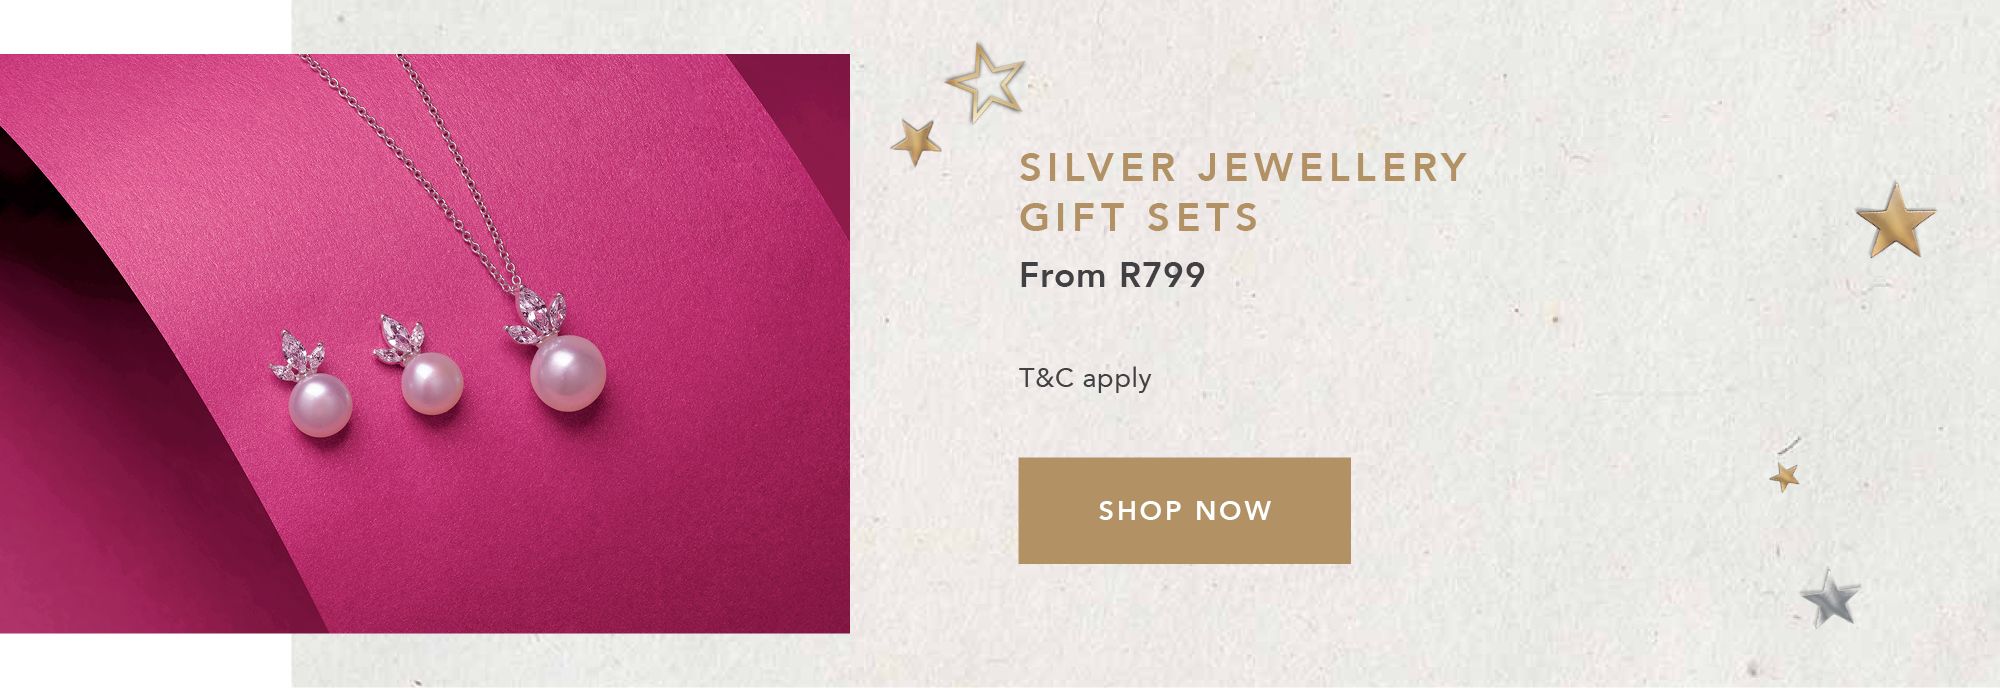 SILVER JEWELLERY GIFT SETS From R799